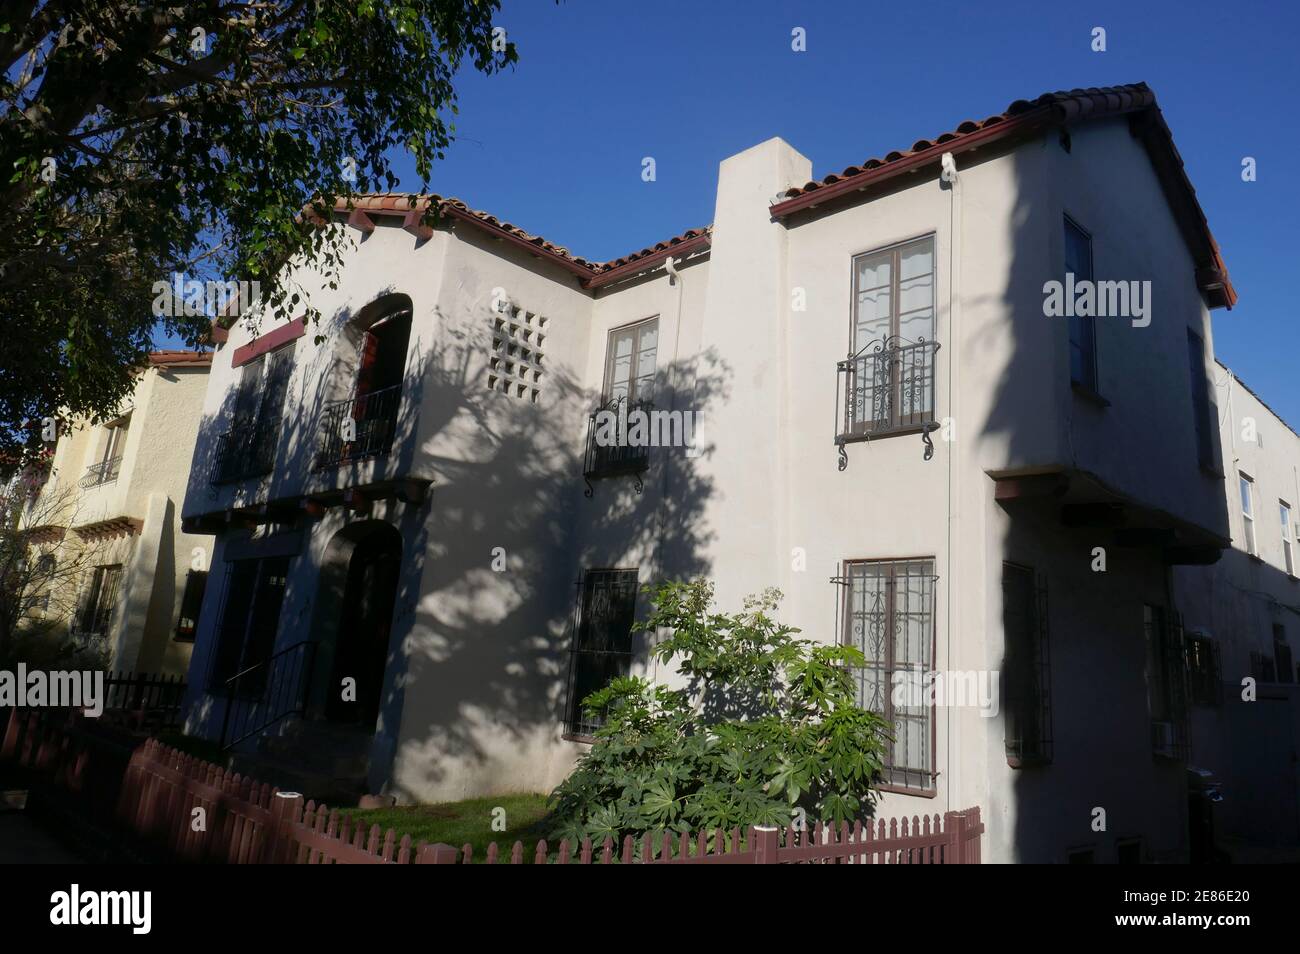 Los Angeles, California, USA 30th January 2021 A general view of atmosphere of Musician/singer Kurt Cobain of Nirvana and singer Courtney Love of Hole former Apartment in 1991/1992 at 448 N. Spaulding Avenue in Los Angeles, California, USA. They lived here when Courtney was pregnant with Frances Bean Cobain. Photo by Barry King/Alamy Stock Photo Stock Photo